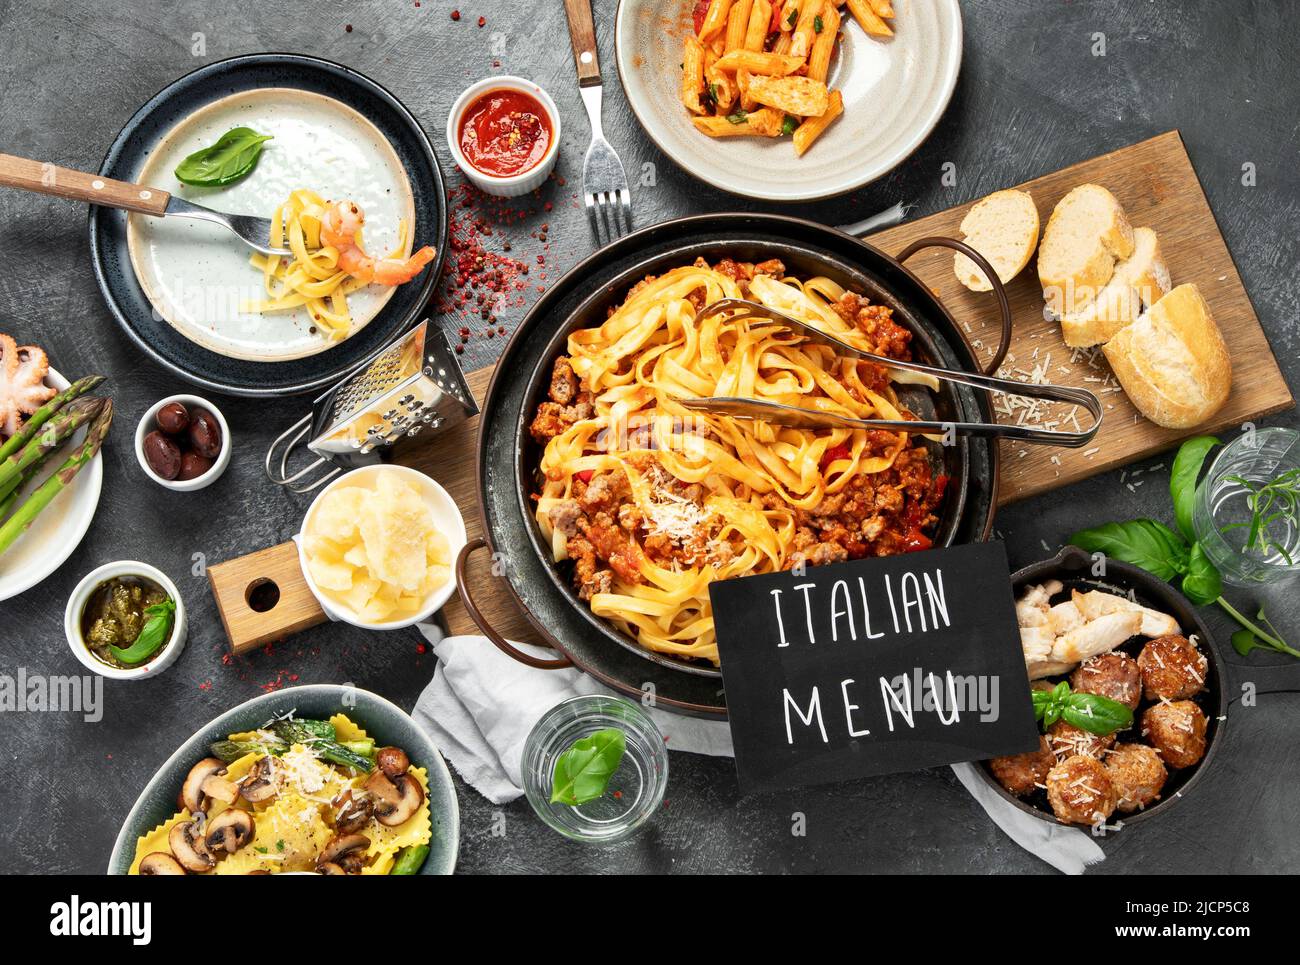 Table of italian meals on plates pasta Bolognese, ravioli, penne with chicken, sauces, parmesan and water on dark background. Top view. Stock Photo